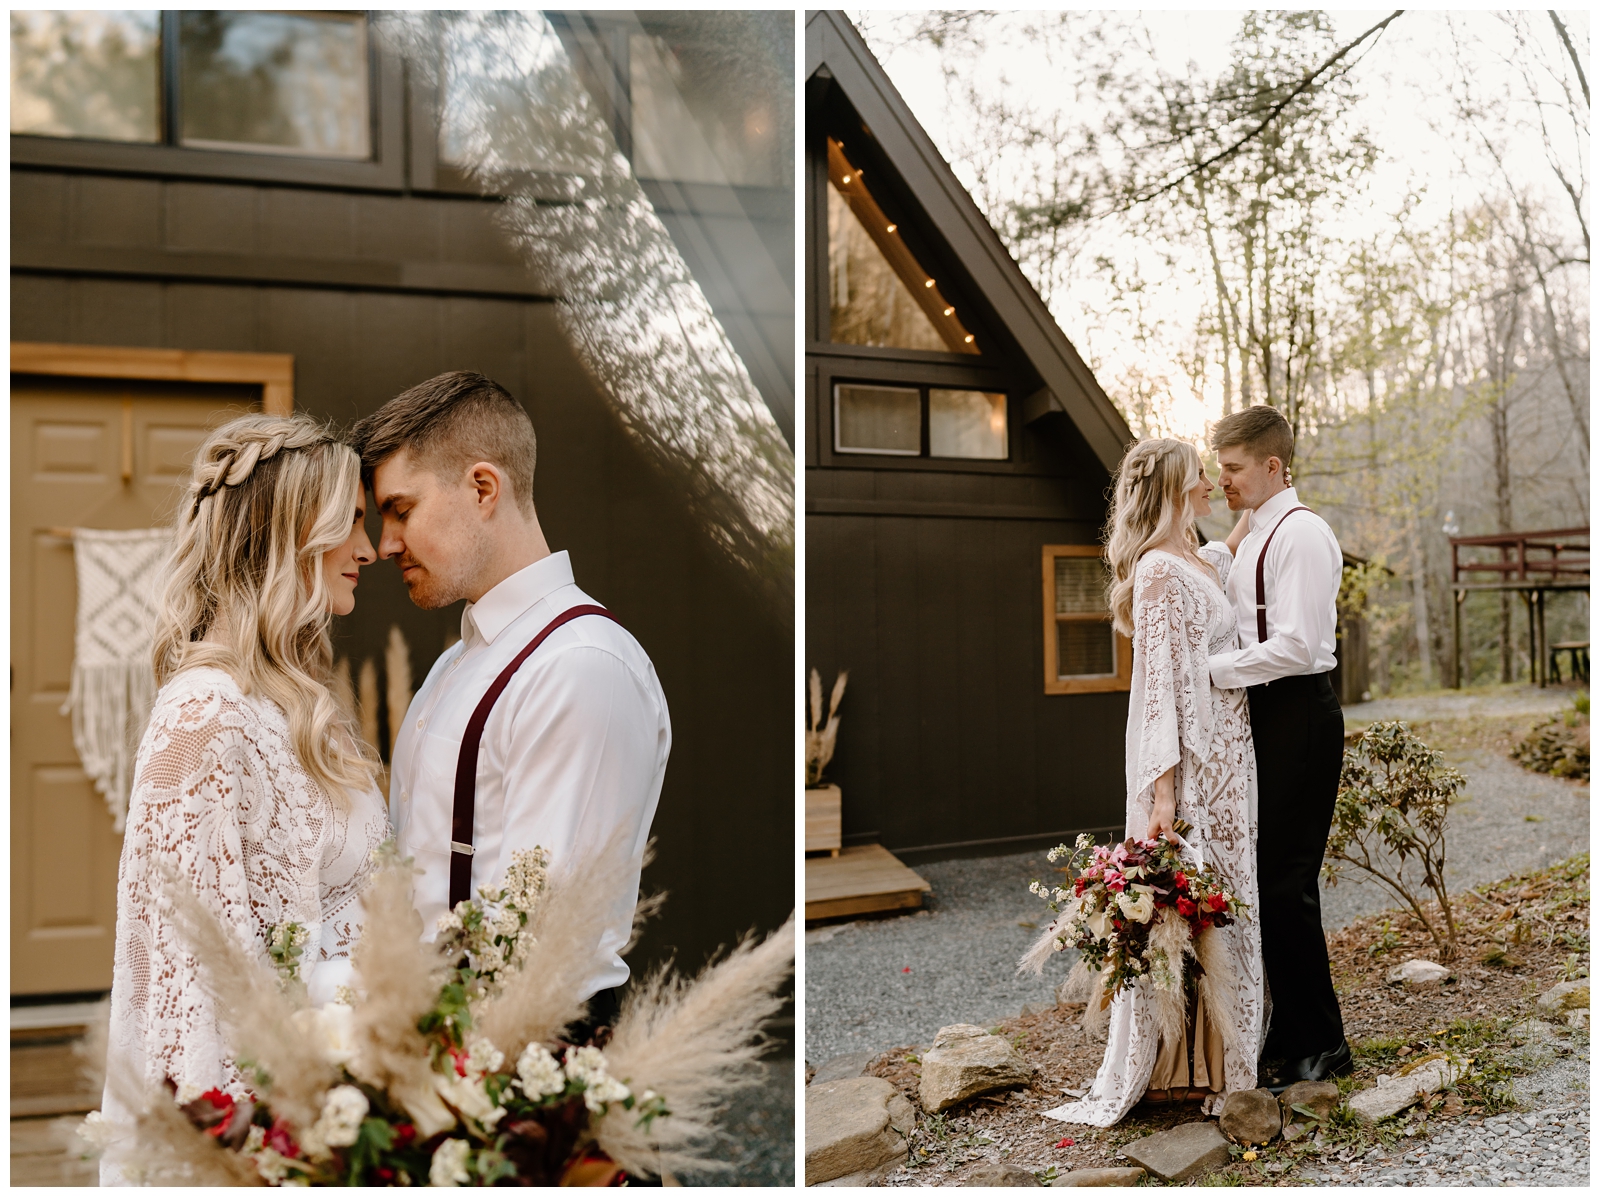 Eloping in the North Carolina mountains of Boone with intimate boho vibes